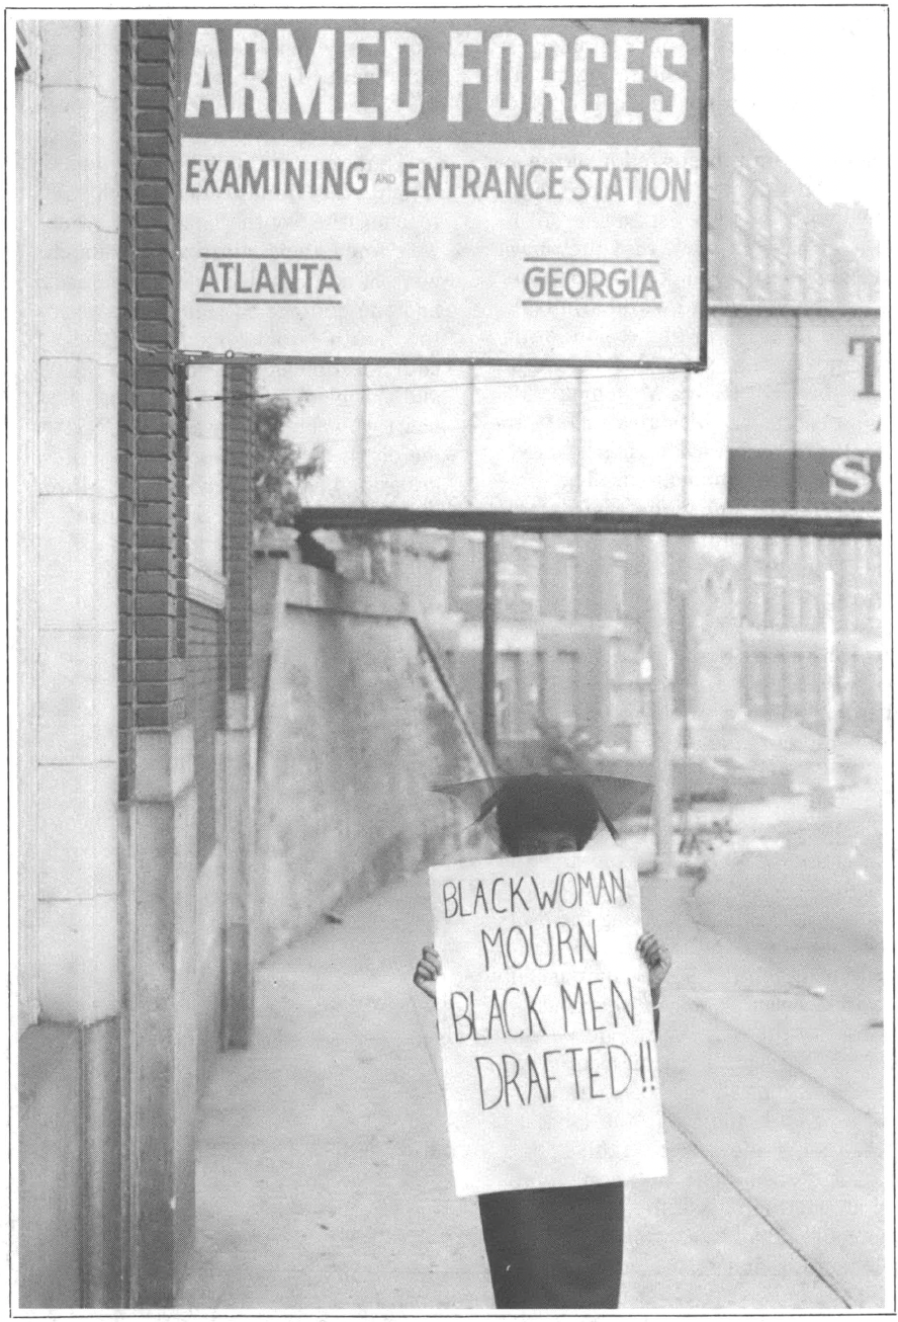 Black woman holds poster outside Armed Forces station saying "Black Woman Mourn Black Men Drafted!!"